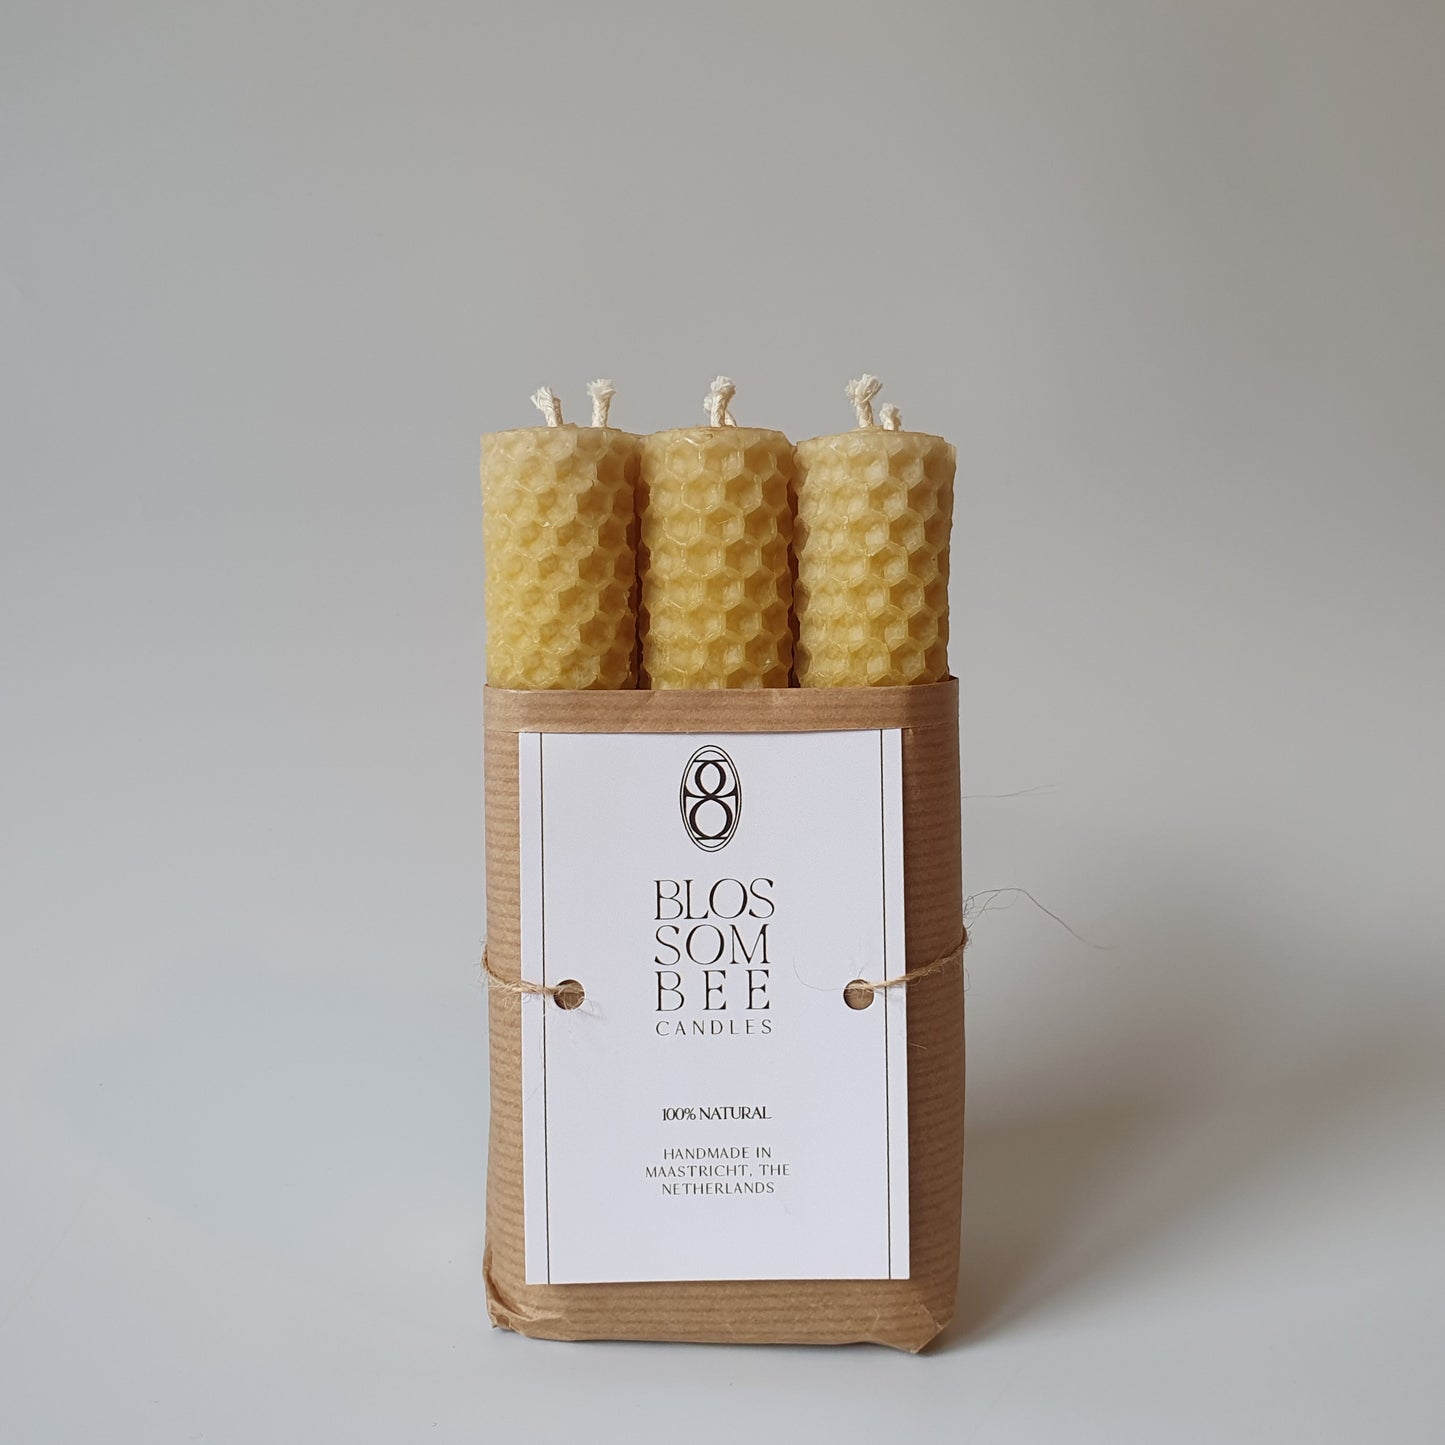 Rolled beeswax - pack of 6